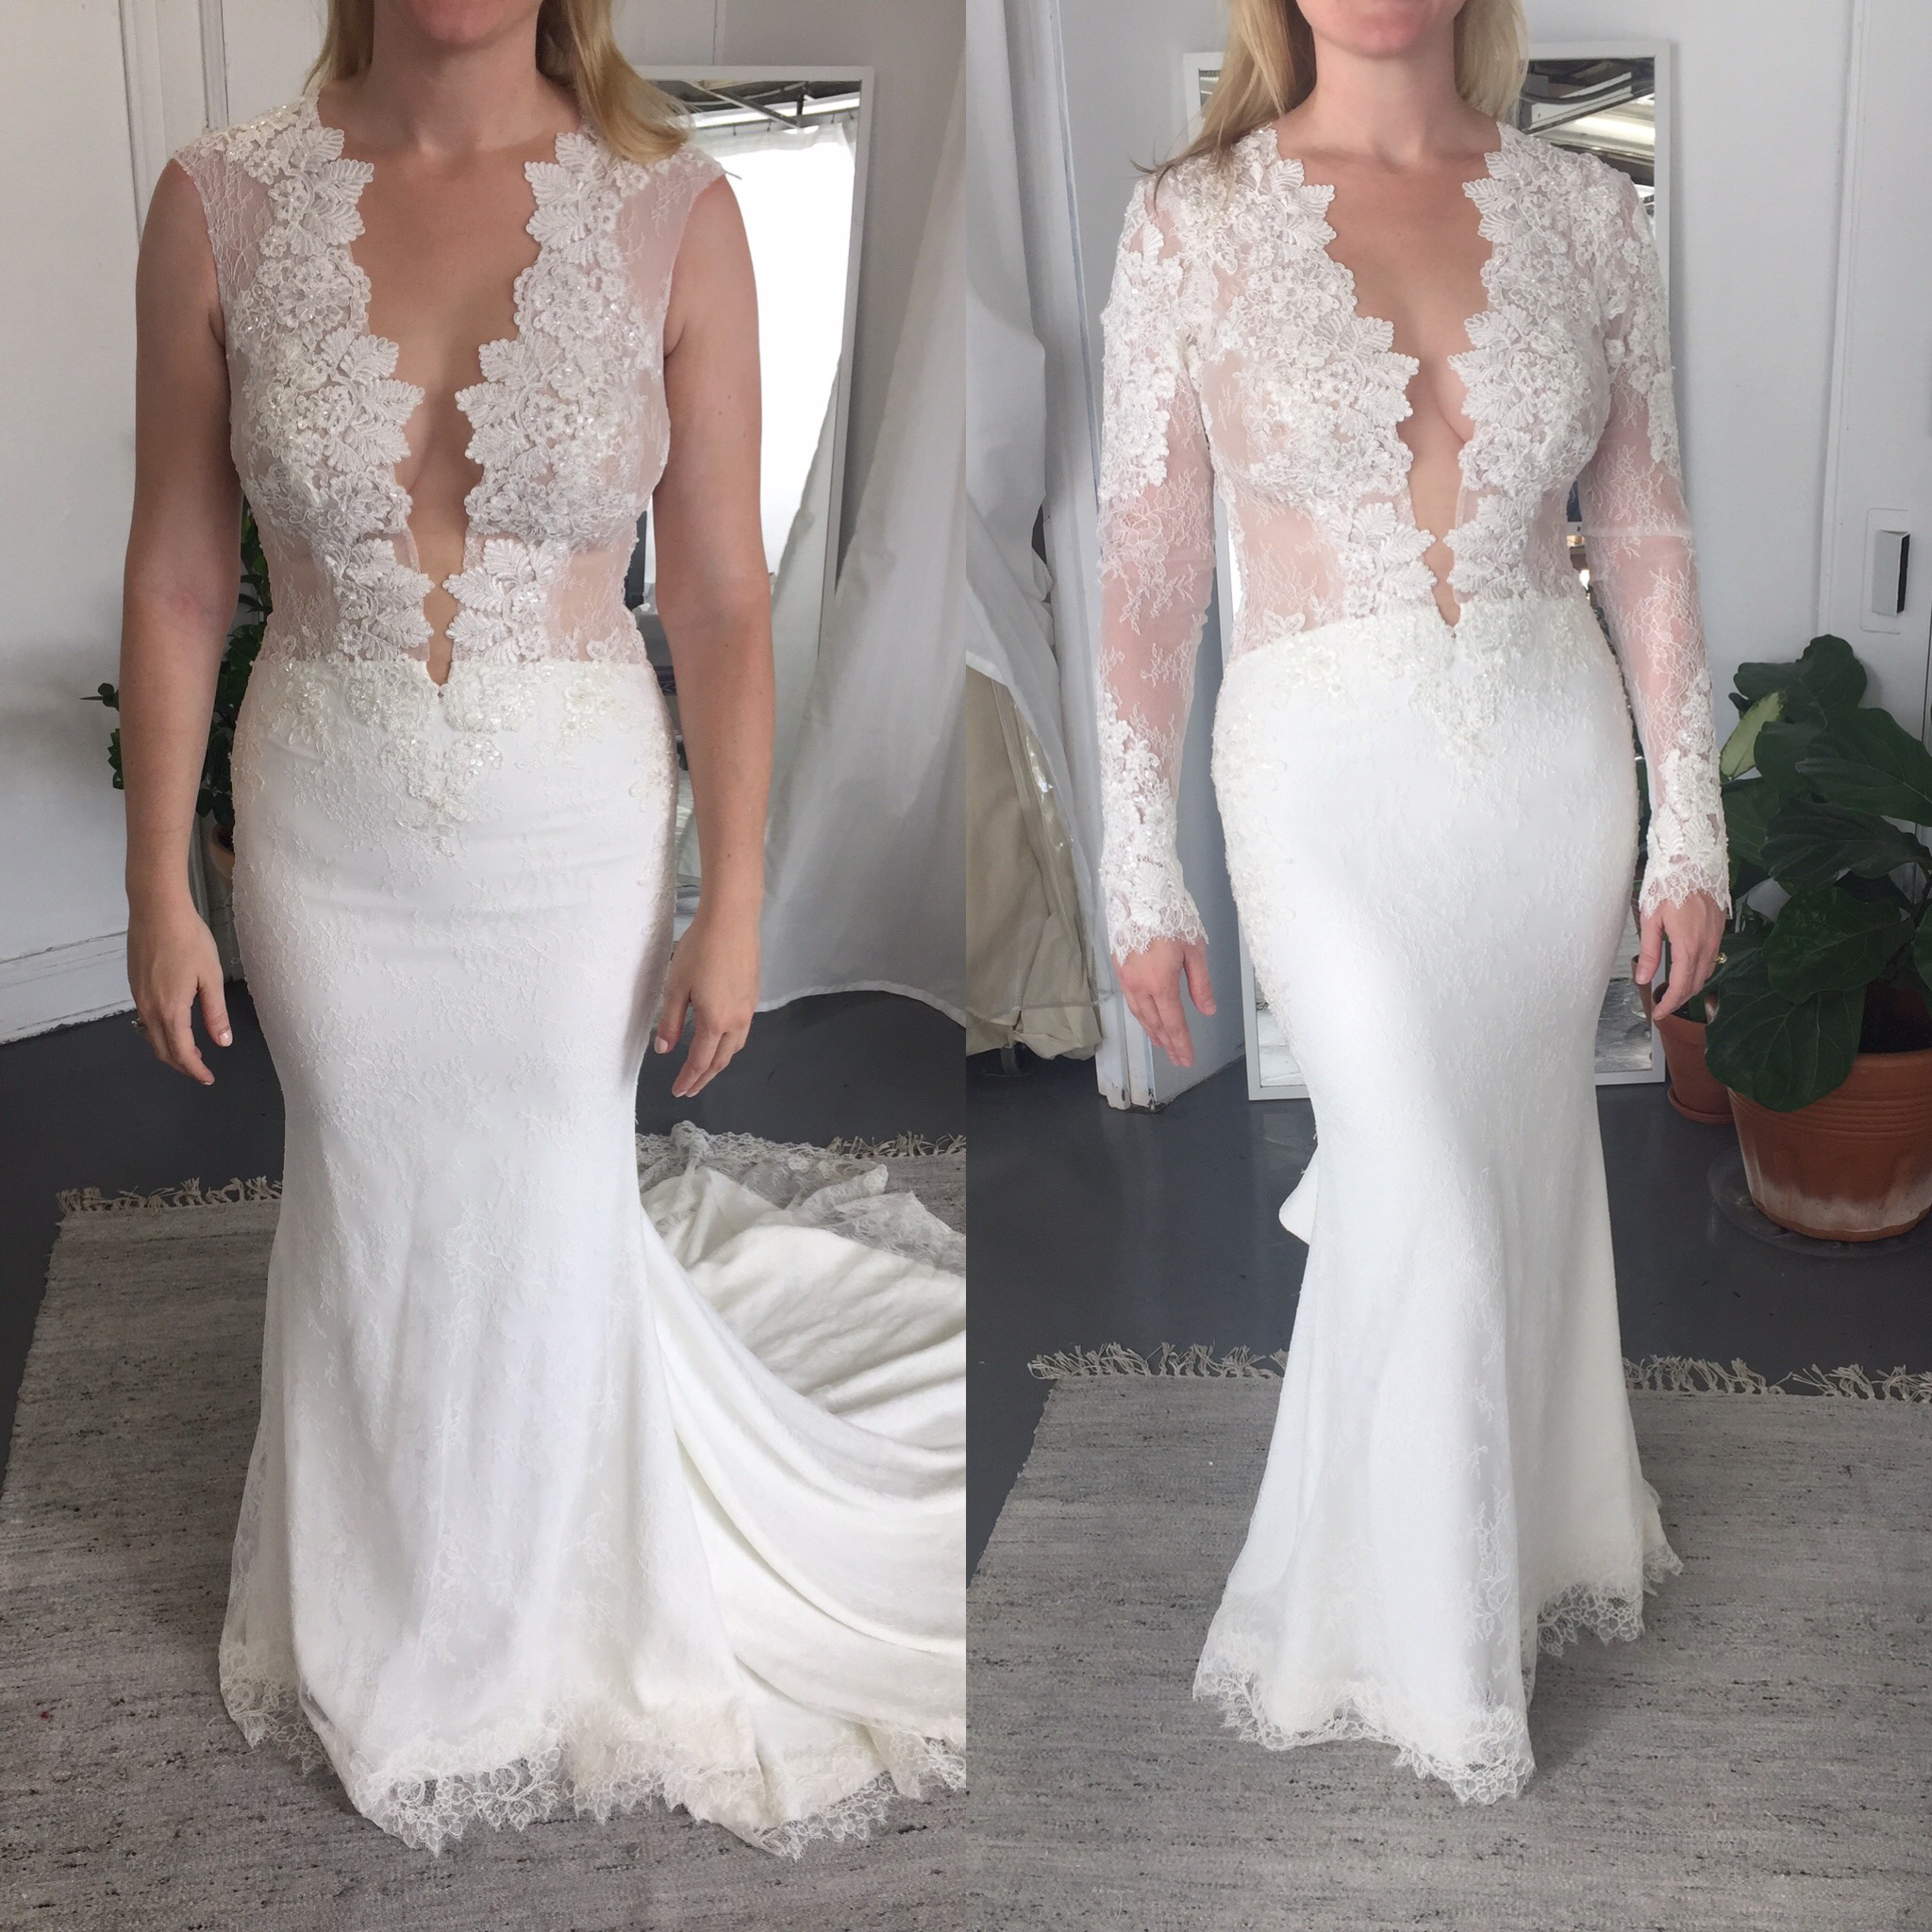 adding lace sleeves to wedding dress